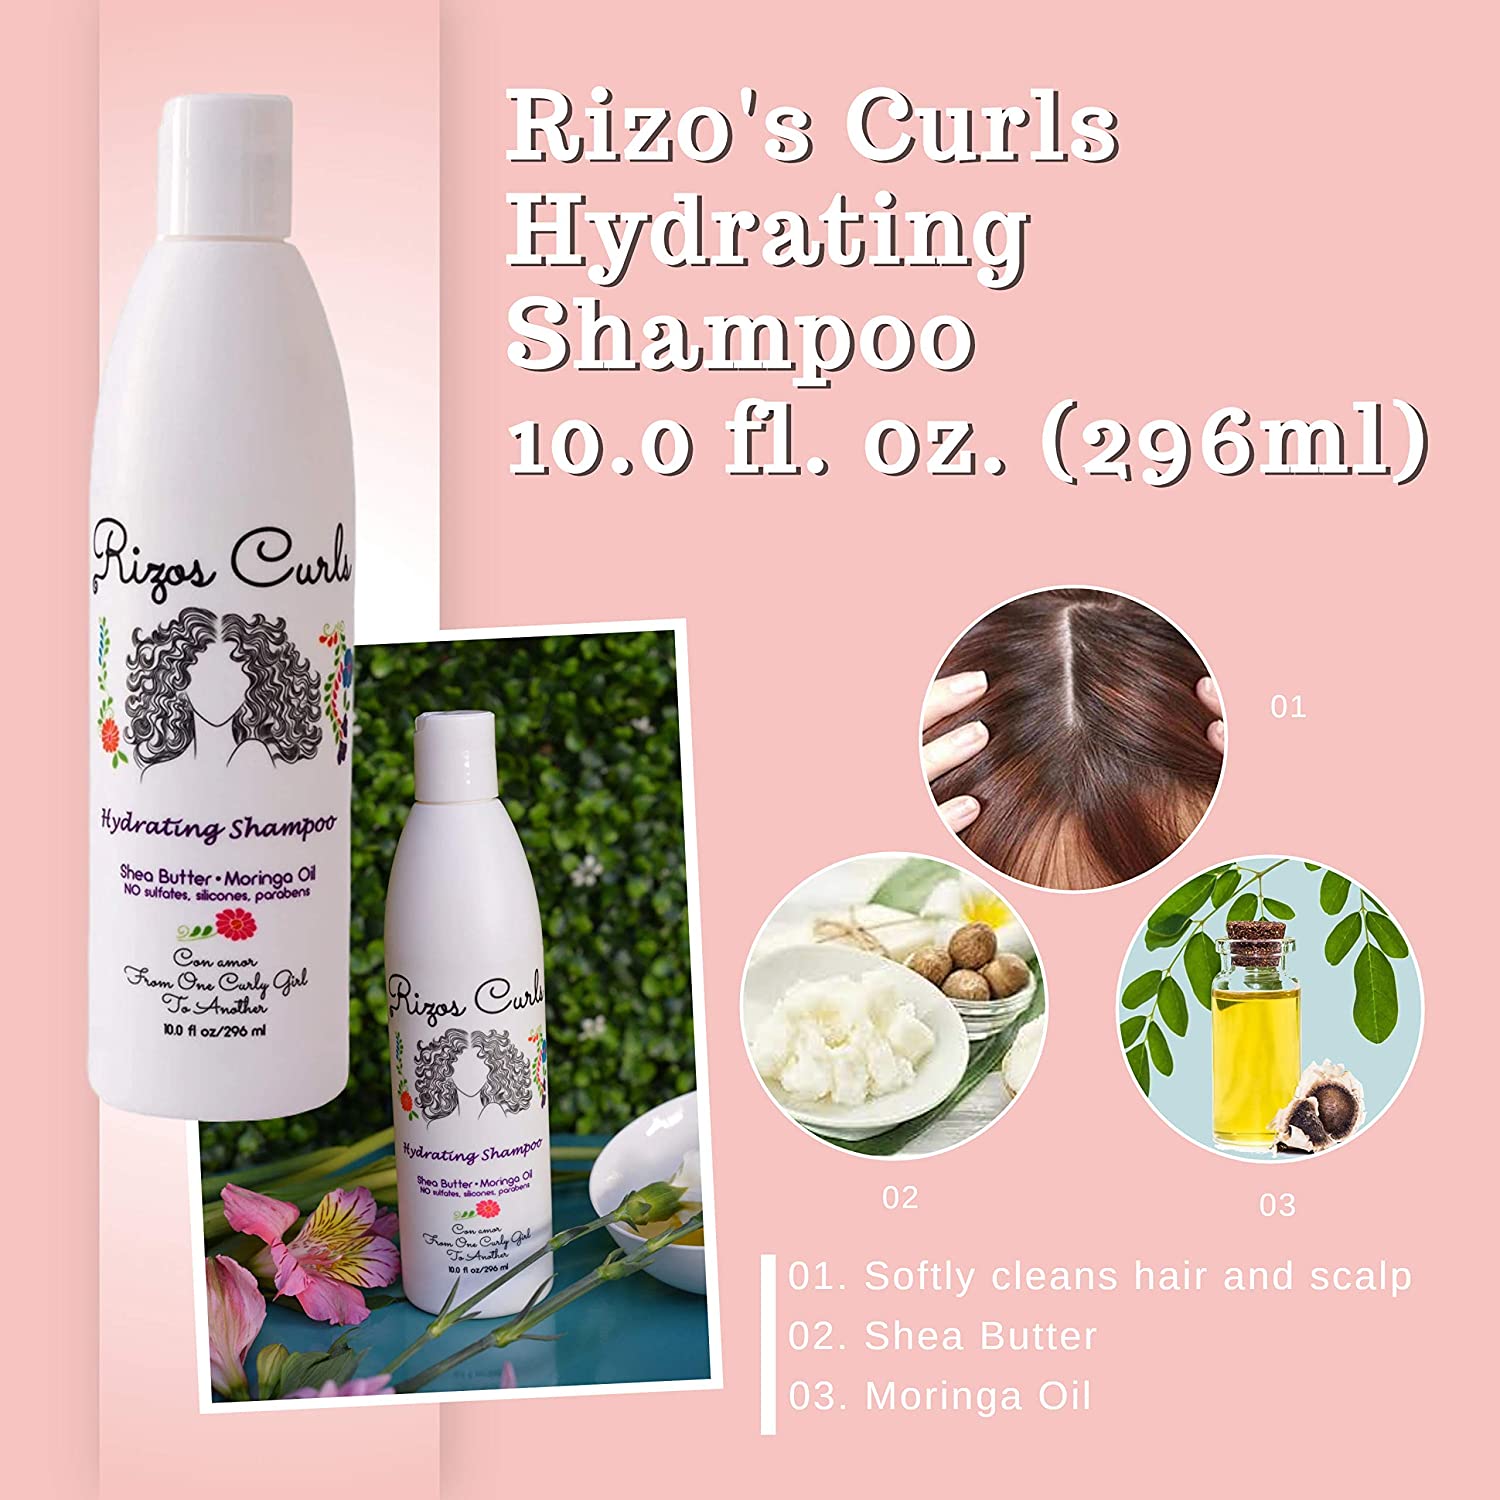 Rizos Curls Hydrating Shampoo, Deep Conditioner & Curl Defining Cream for Curly Hair Products - Intense Treatment & Nourishment for Wavy and Curly Hair (Hair Care Set) - image 4 of 7